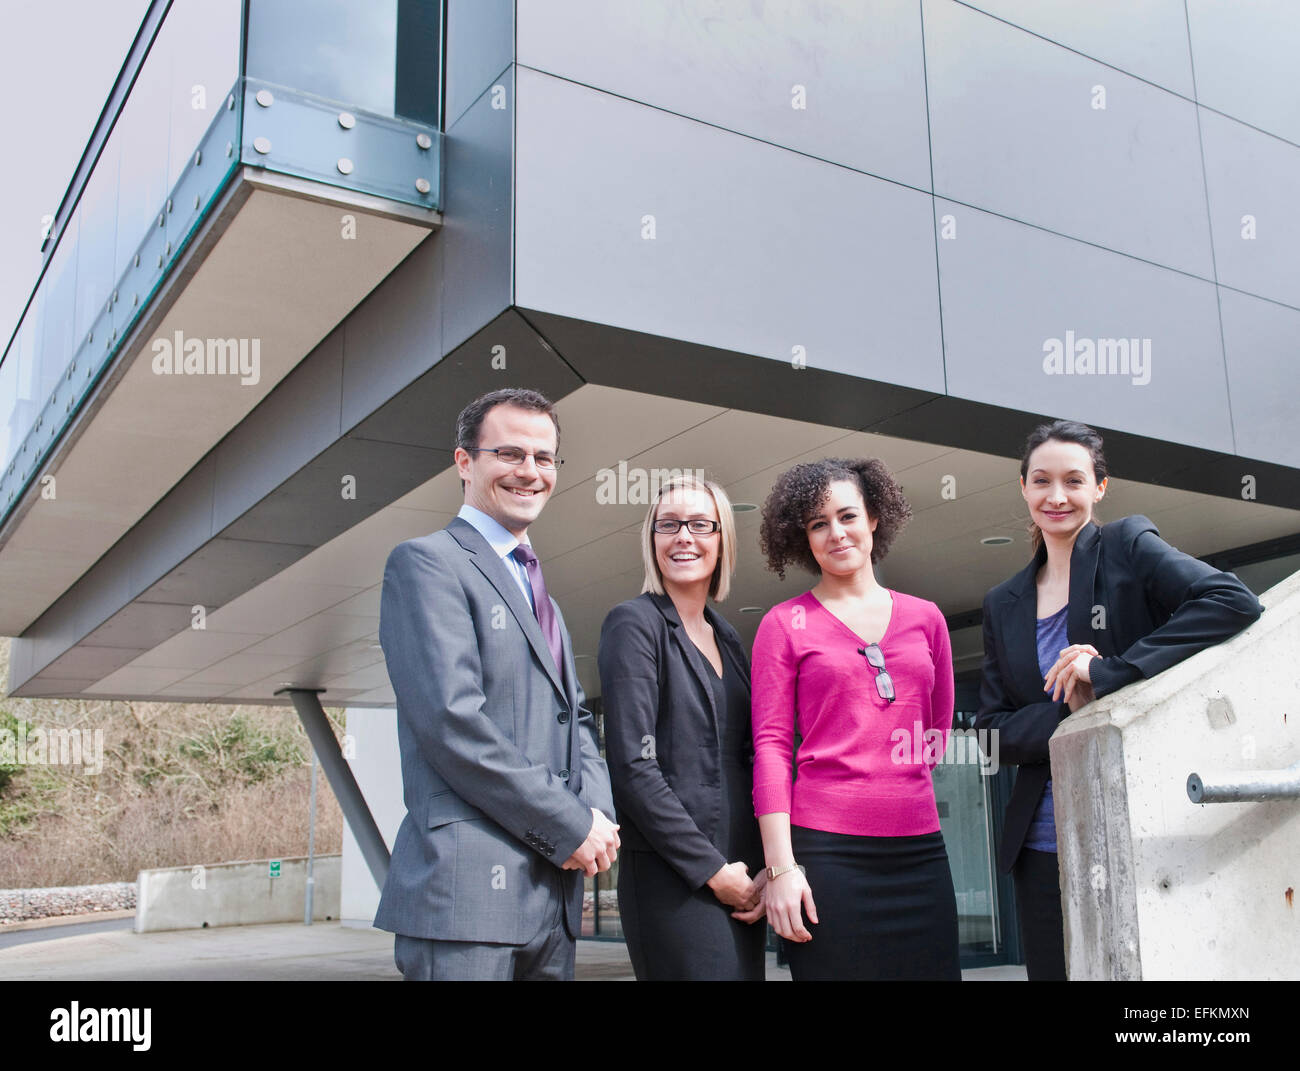 Portrait of businessman and three businesswomen outside office building Stock Photo